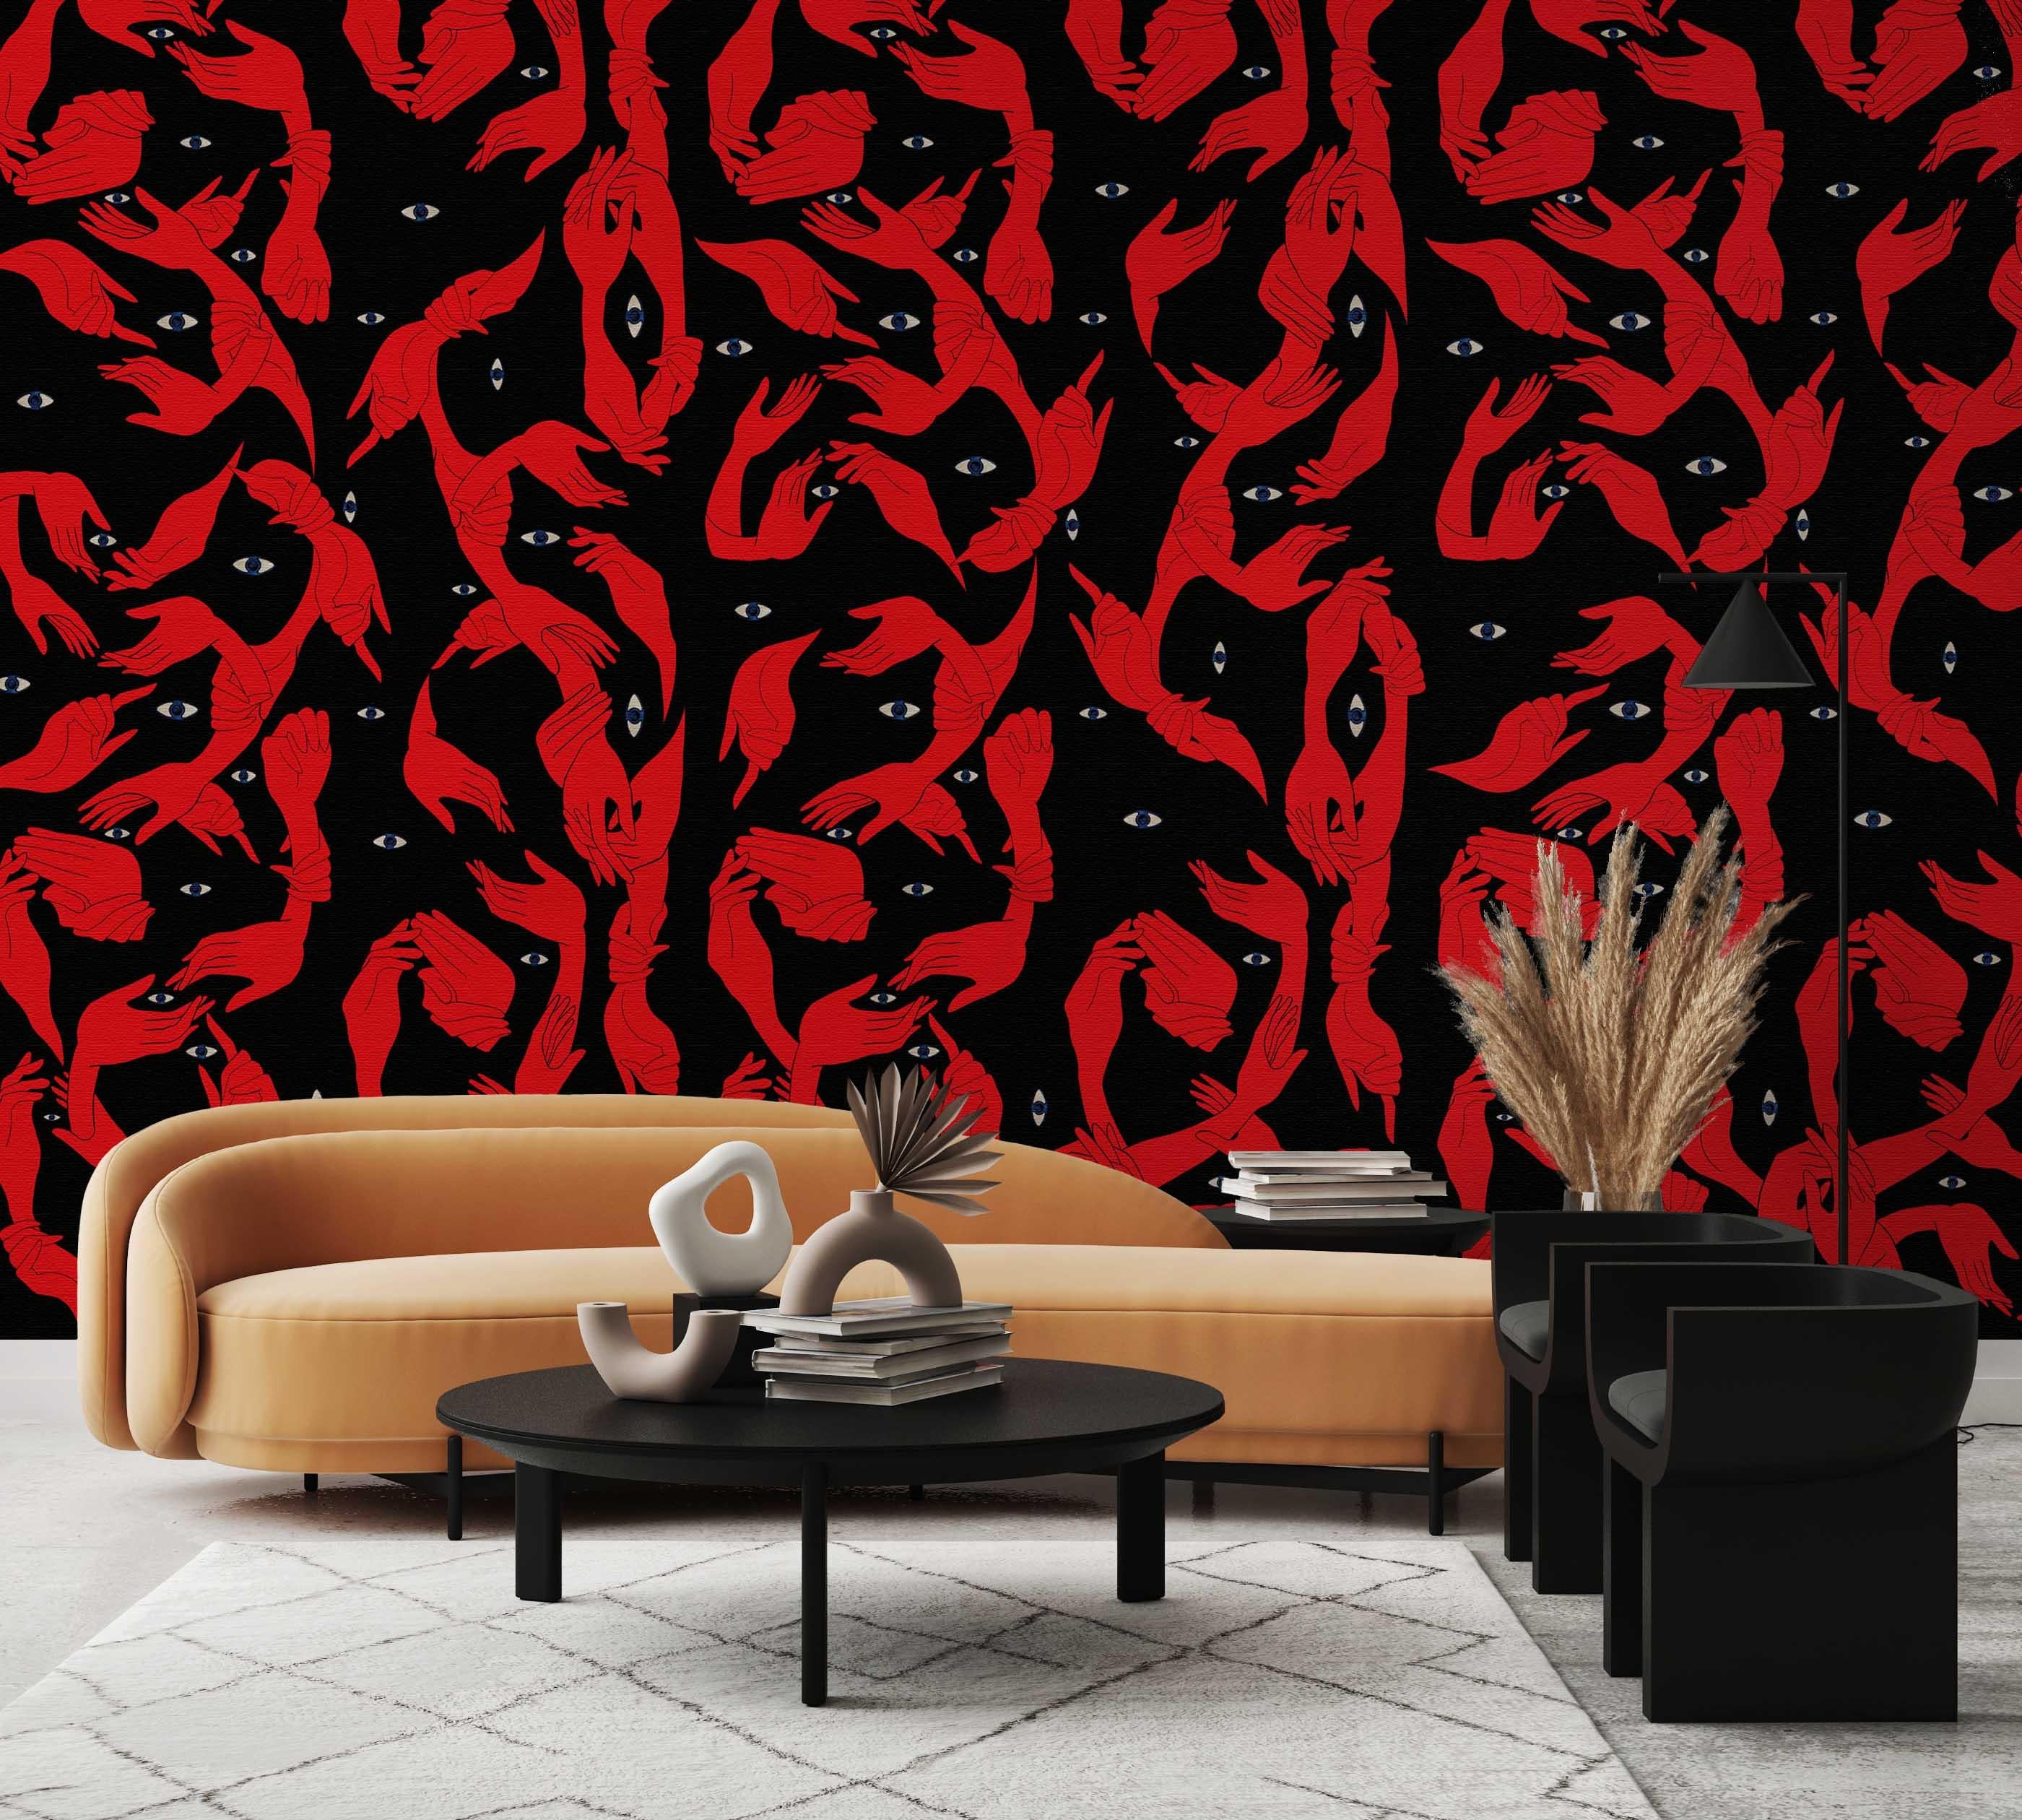 Background: Midnight Black
Subjects: Red
Designer: Marika Tardio
Designed by hand in Digital Art
Made in: Italy

Printing support: Fine Art ( front 50% cellulose, back non-woven backing
Greenguard Gold Inks, low emissions

***
About the